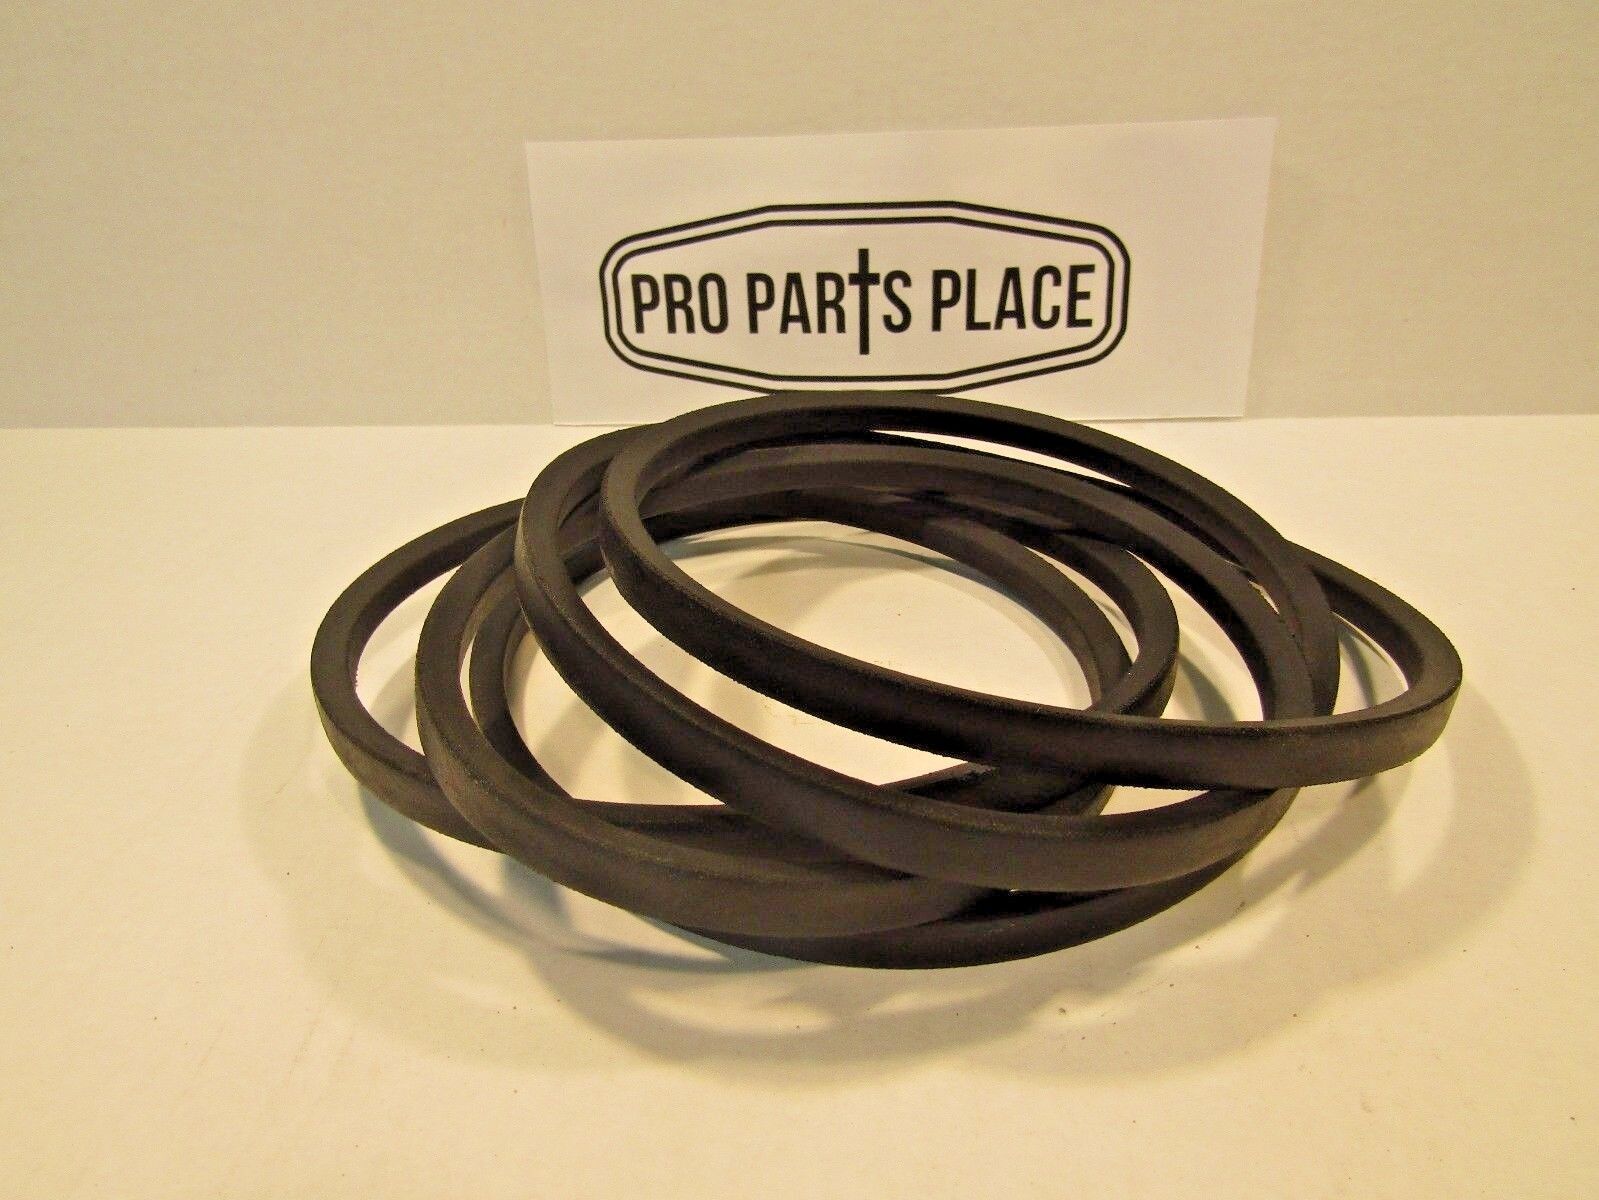 1/2" x 61" PUMP DRIVE REPLACEMENT BELT FOR SCAG 481461 48760 TURF TIGER 52" 61"